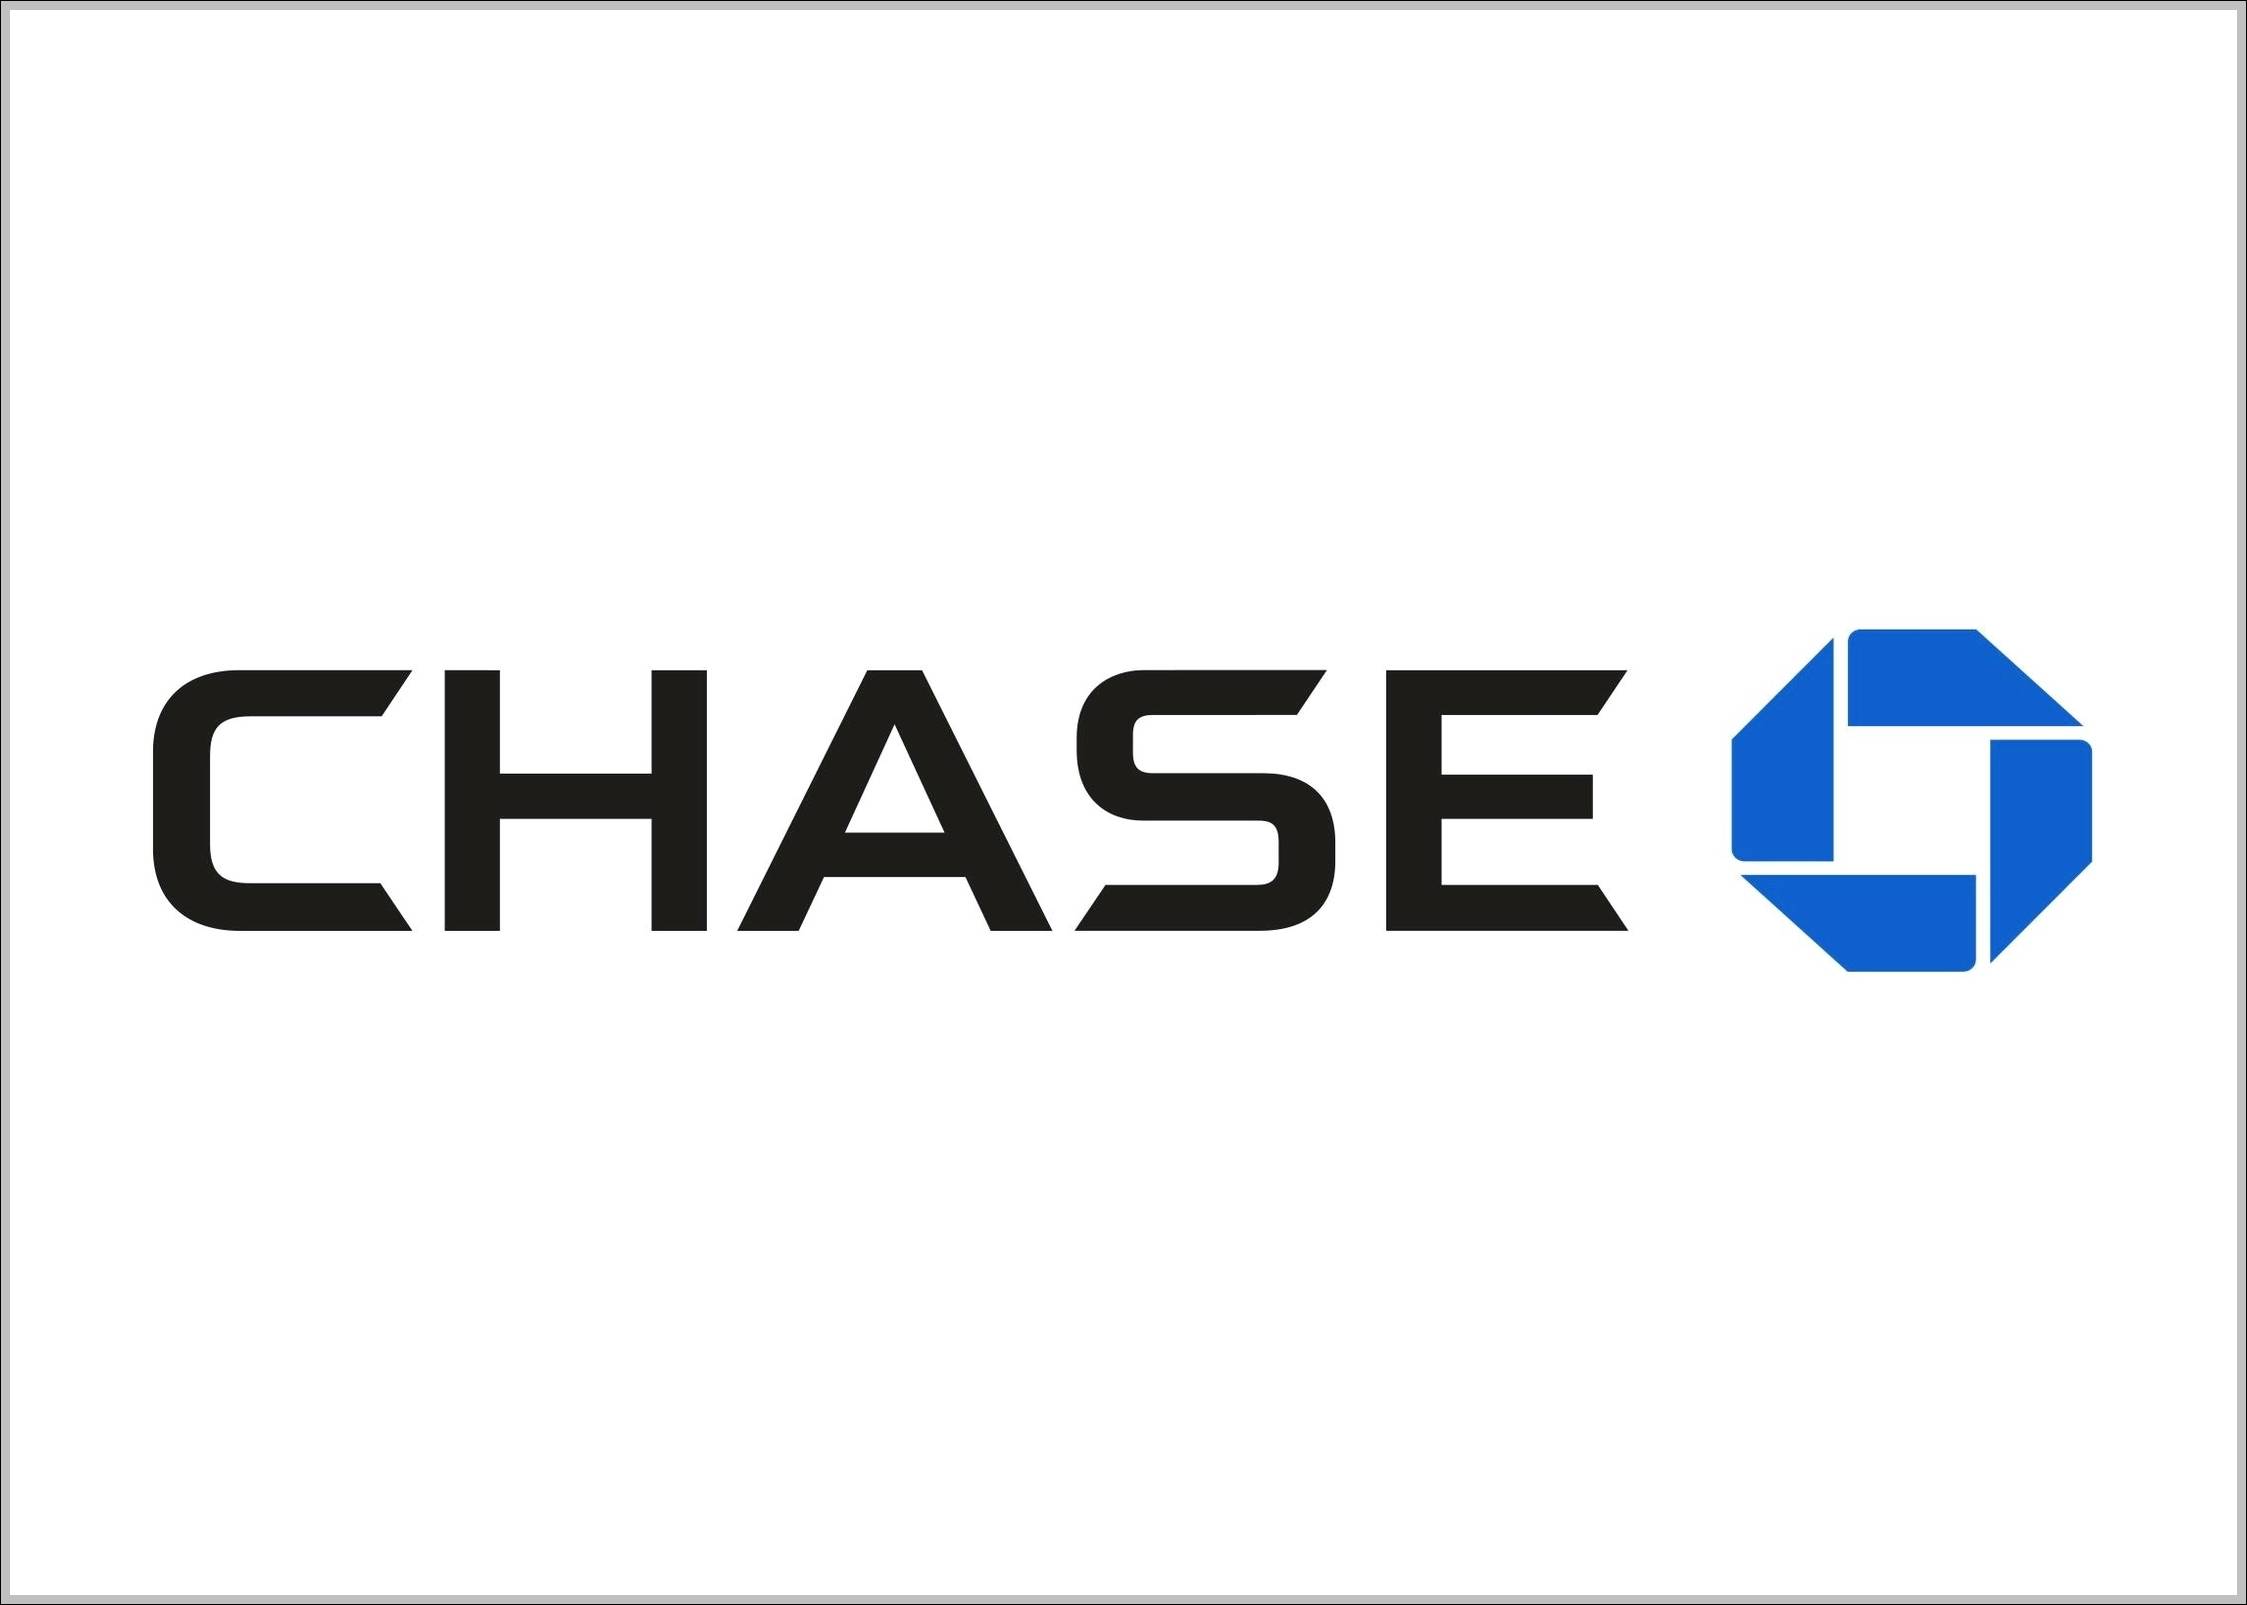 Chase sign